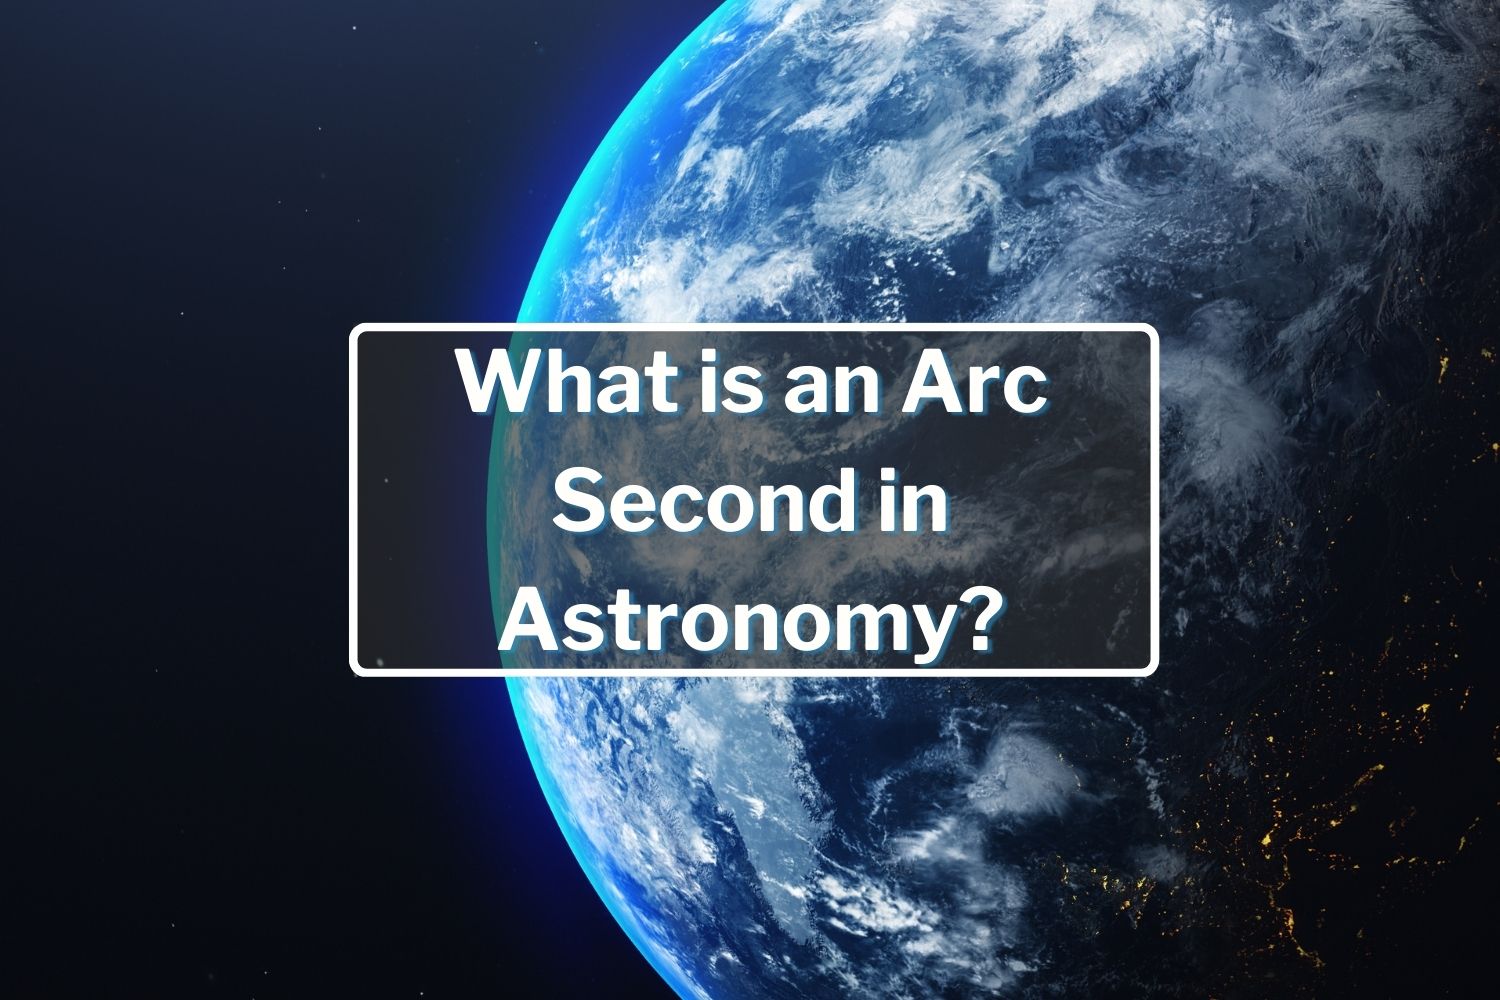 What is an Arc Second in Astronomy?